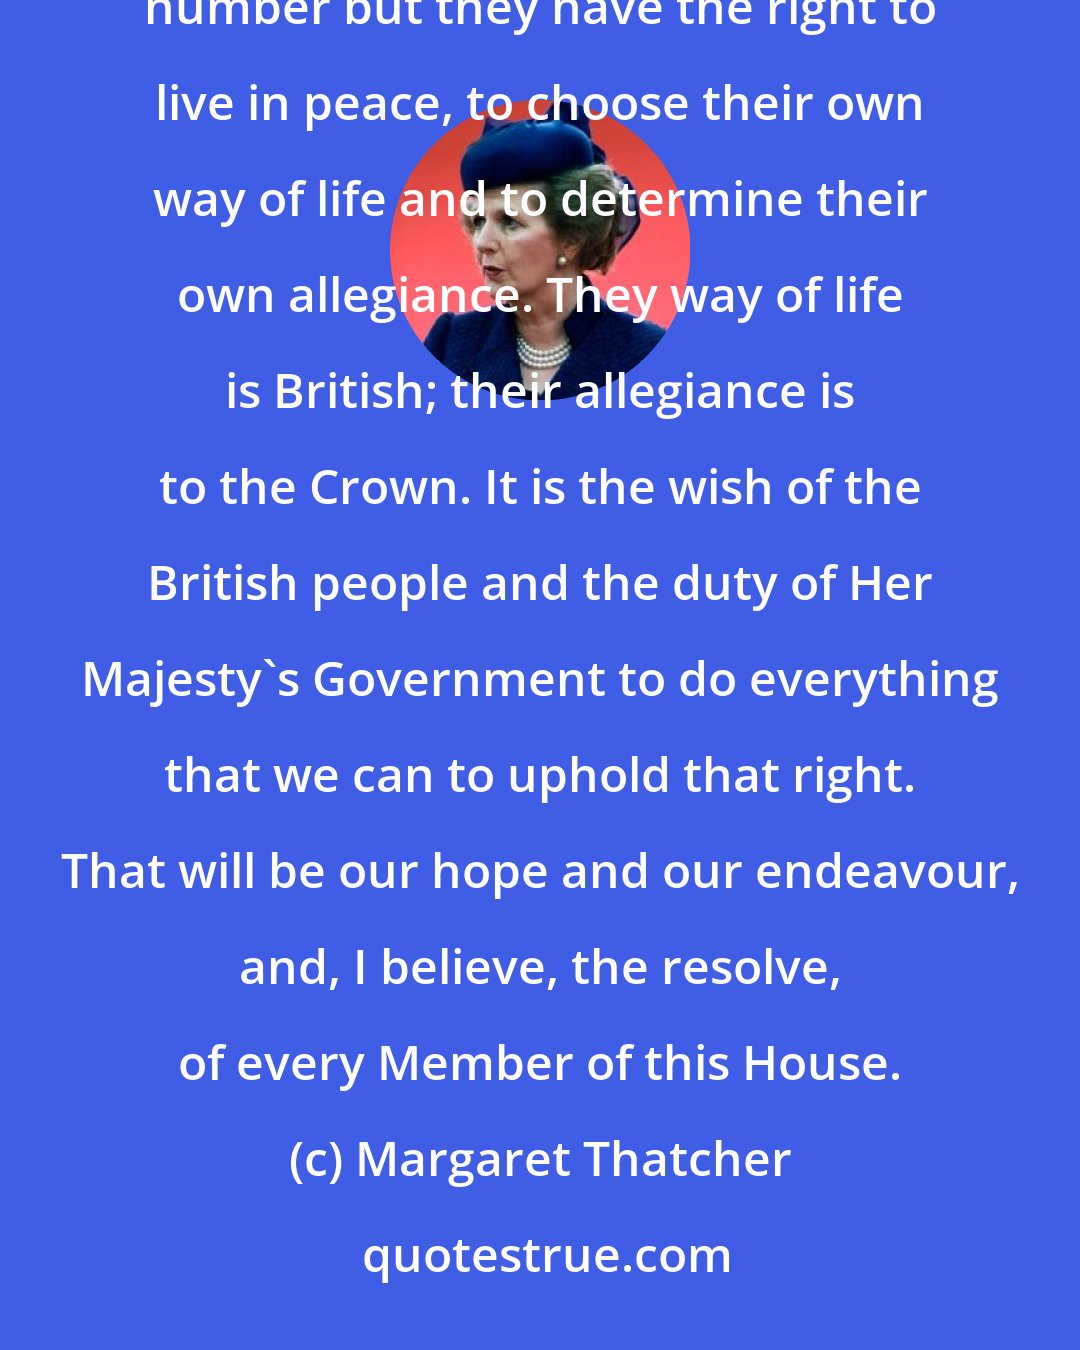 Margaret Thatcher: The people of the Falkland Islands, like the people of the United Kingdom, are an island race. They are few in number but they have the right to live in peace, to choose their own way of life and to determine their own allegiance. They way of life is British; their allegiance is to the Crown. It is the wish of the British people and the duty of Her Majesty's Government to do everything that we can to uphold that right. That will be our hope and our endeavour, and, I believe, the resolve, of every Member of this House.